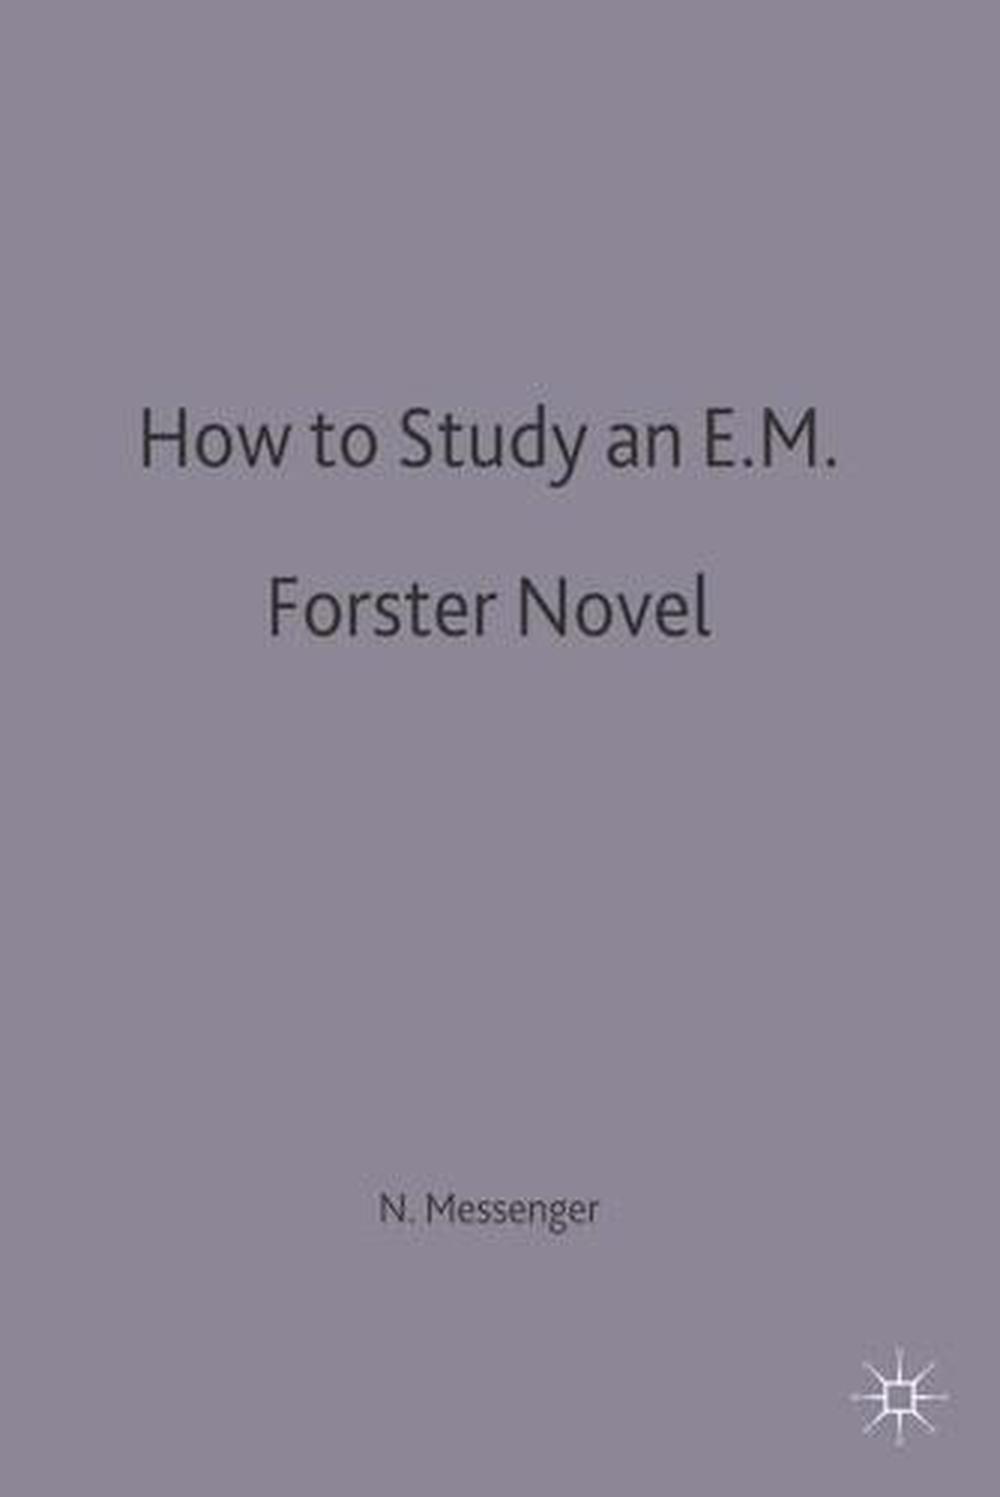 How to Study an E. M. Forster Novel by Nigel Messenger (English) Paperback Book